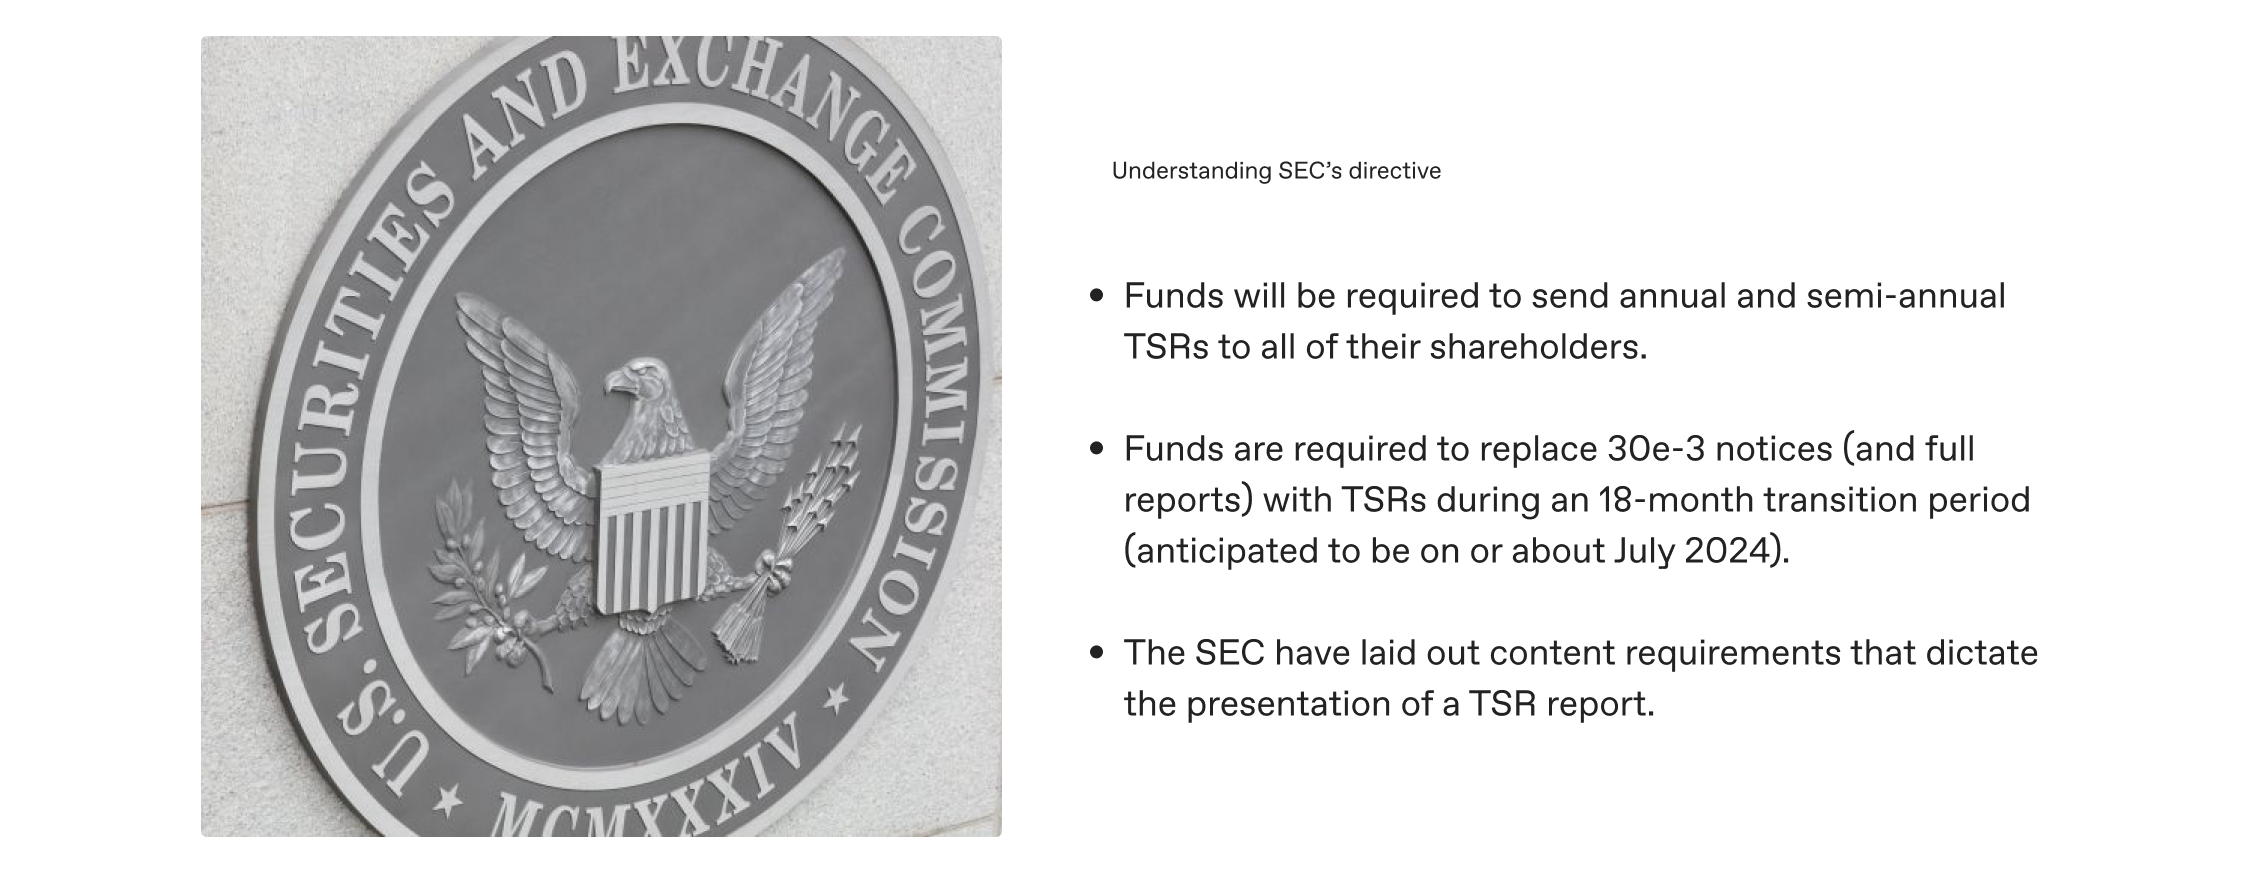 Photograph of the SEC logo seal accompanied by the following copy to the right of the image: 

Understanding SEC’s directive: 

Funds will be required to send annual and semi-annual TSRs to all of their shareholders.

Funds are required to replace 30e-3 notices (and full reports) with TSRs during an 18-month transition period (anticipated to be on or about July 2024). 

The SEC have laid out content requirements that dictate  the presentation of a TSR report. 